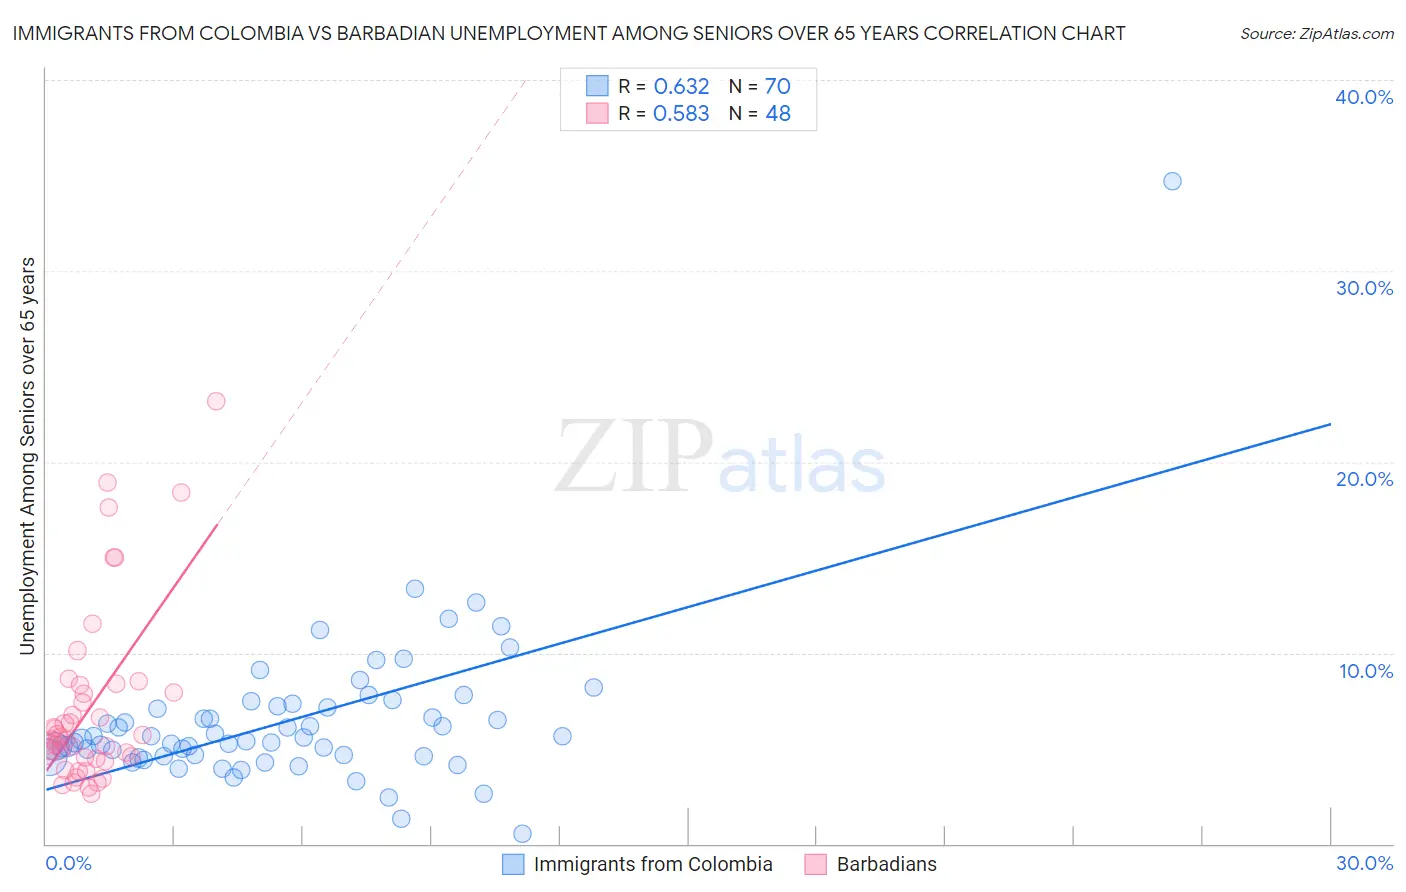 Immigrants from Colombia vs Barbadian Unemployment Among Seniors over 65 years